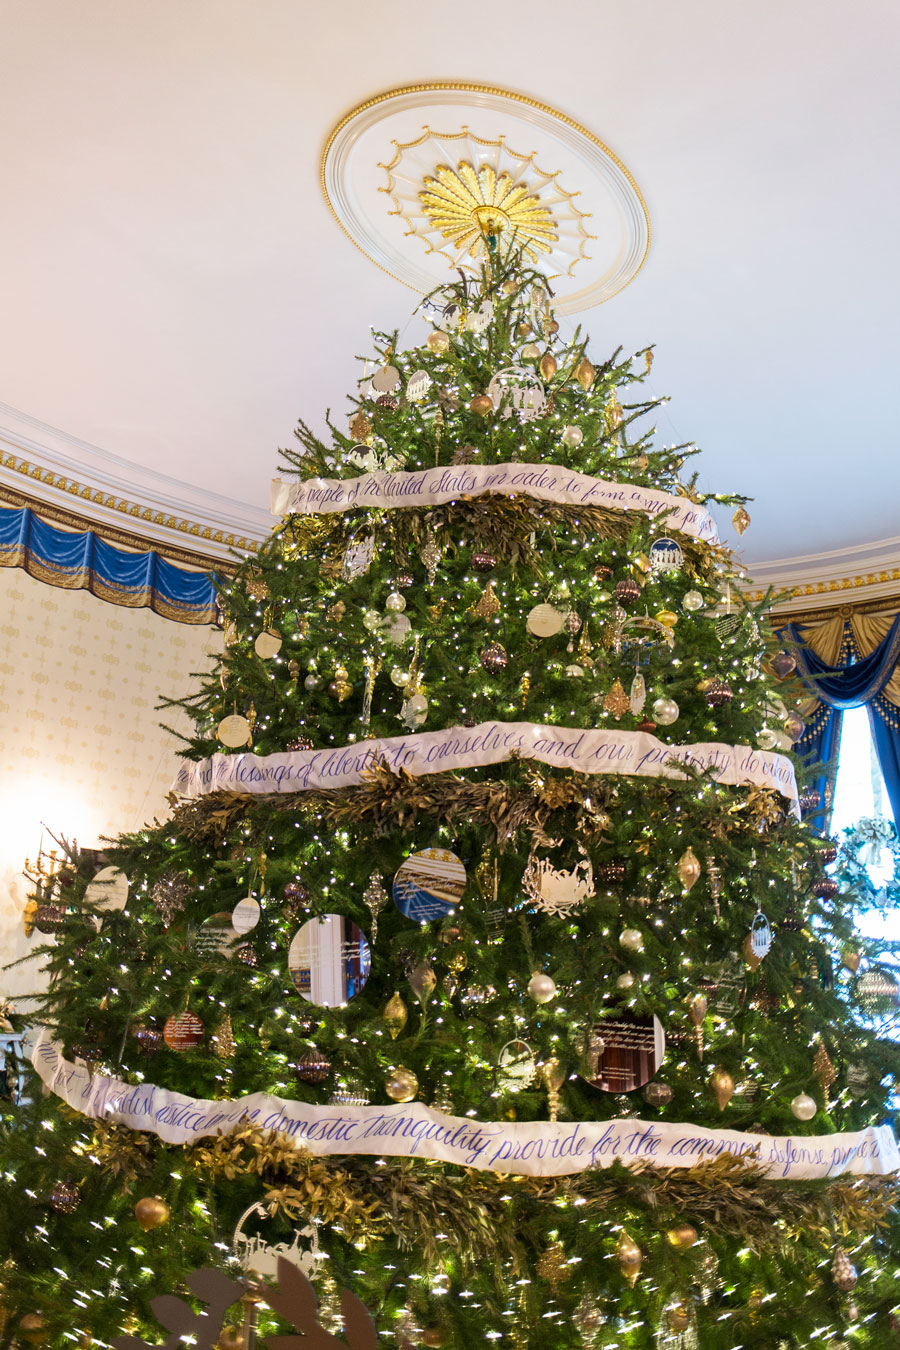 This year's iconic Blue Room Christmas Tree celebrates "We the People," as it is trimmed with ribbon garland featuring the Preamble to the United States Constitution.